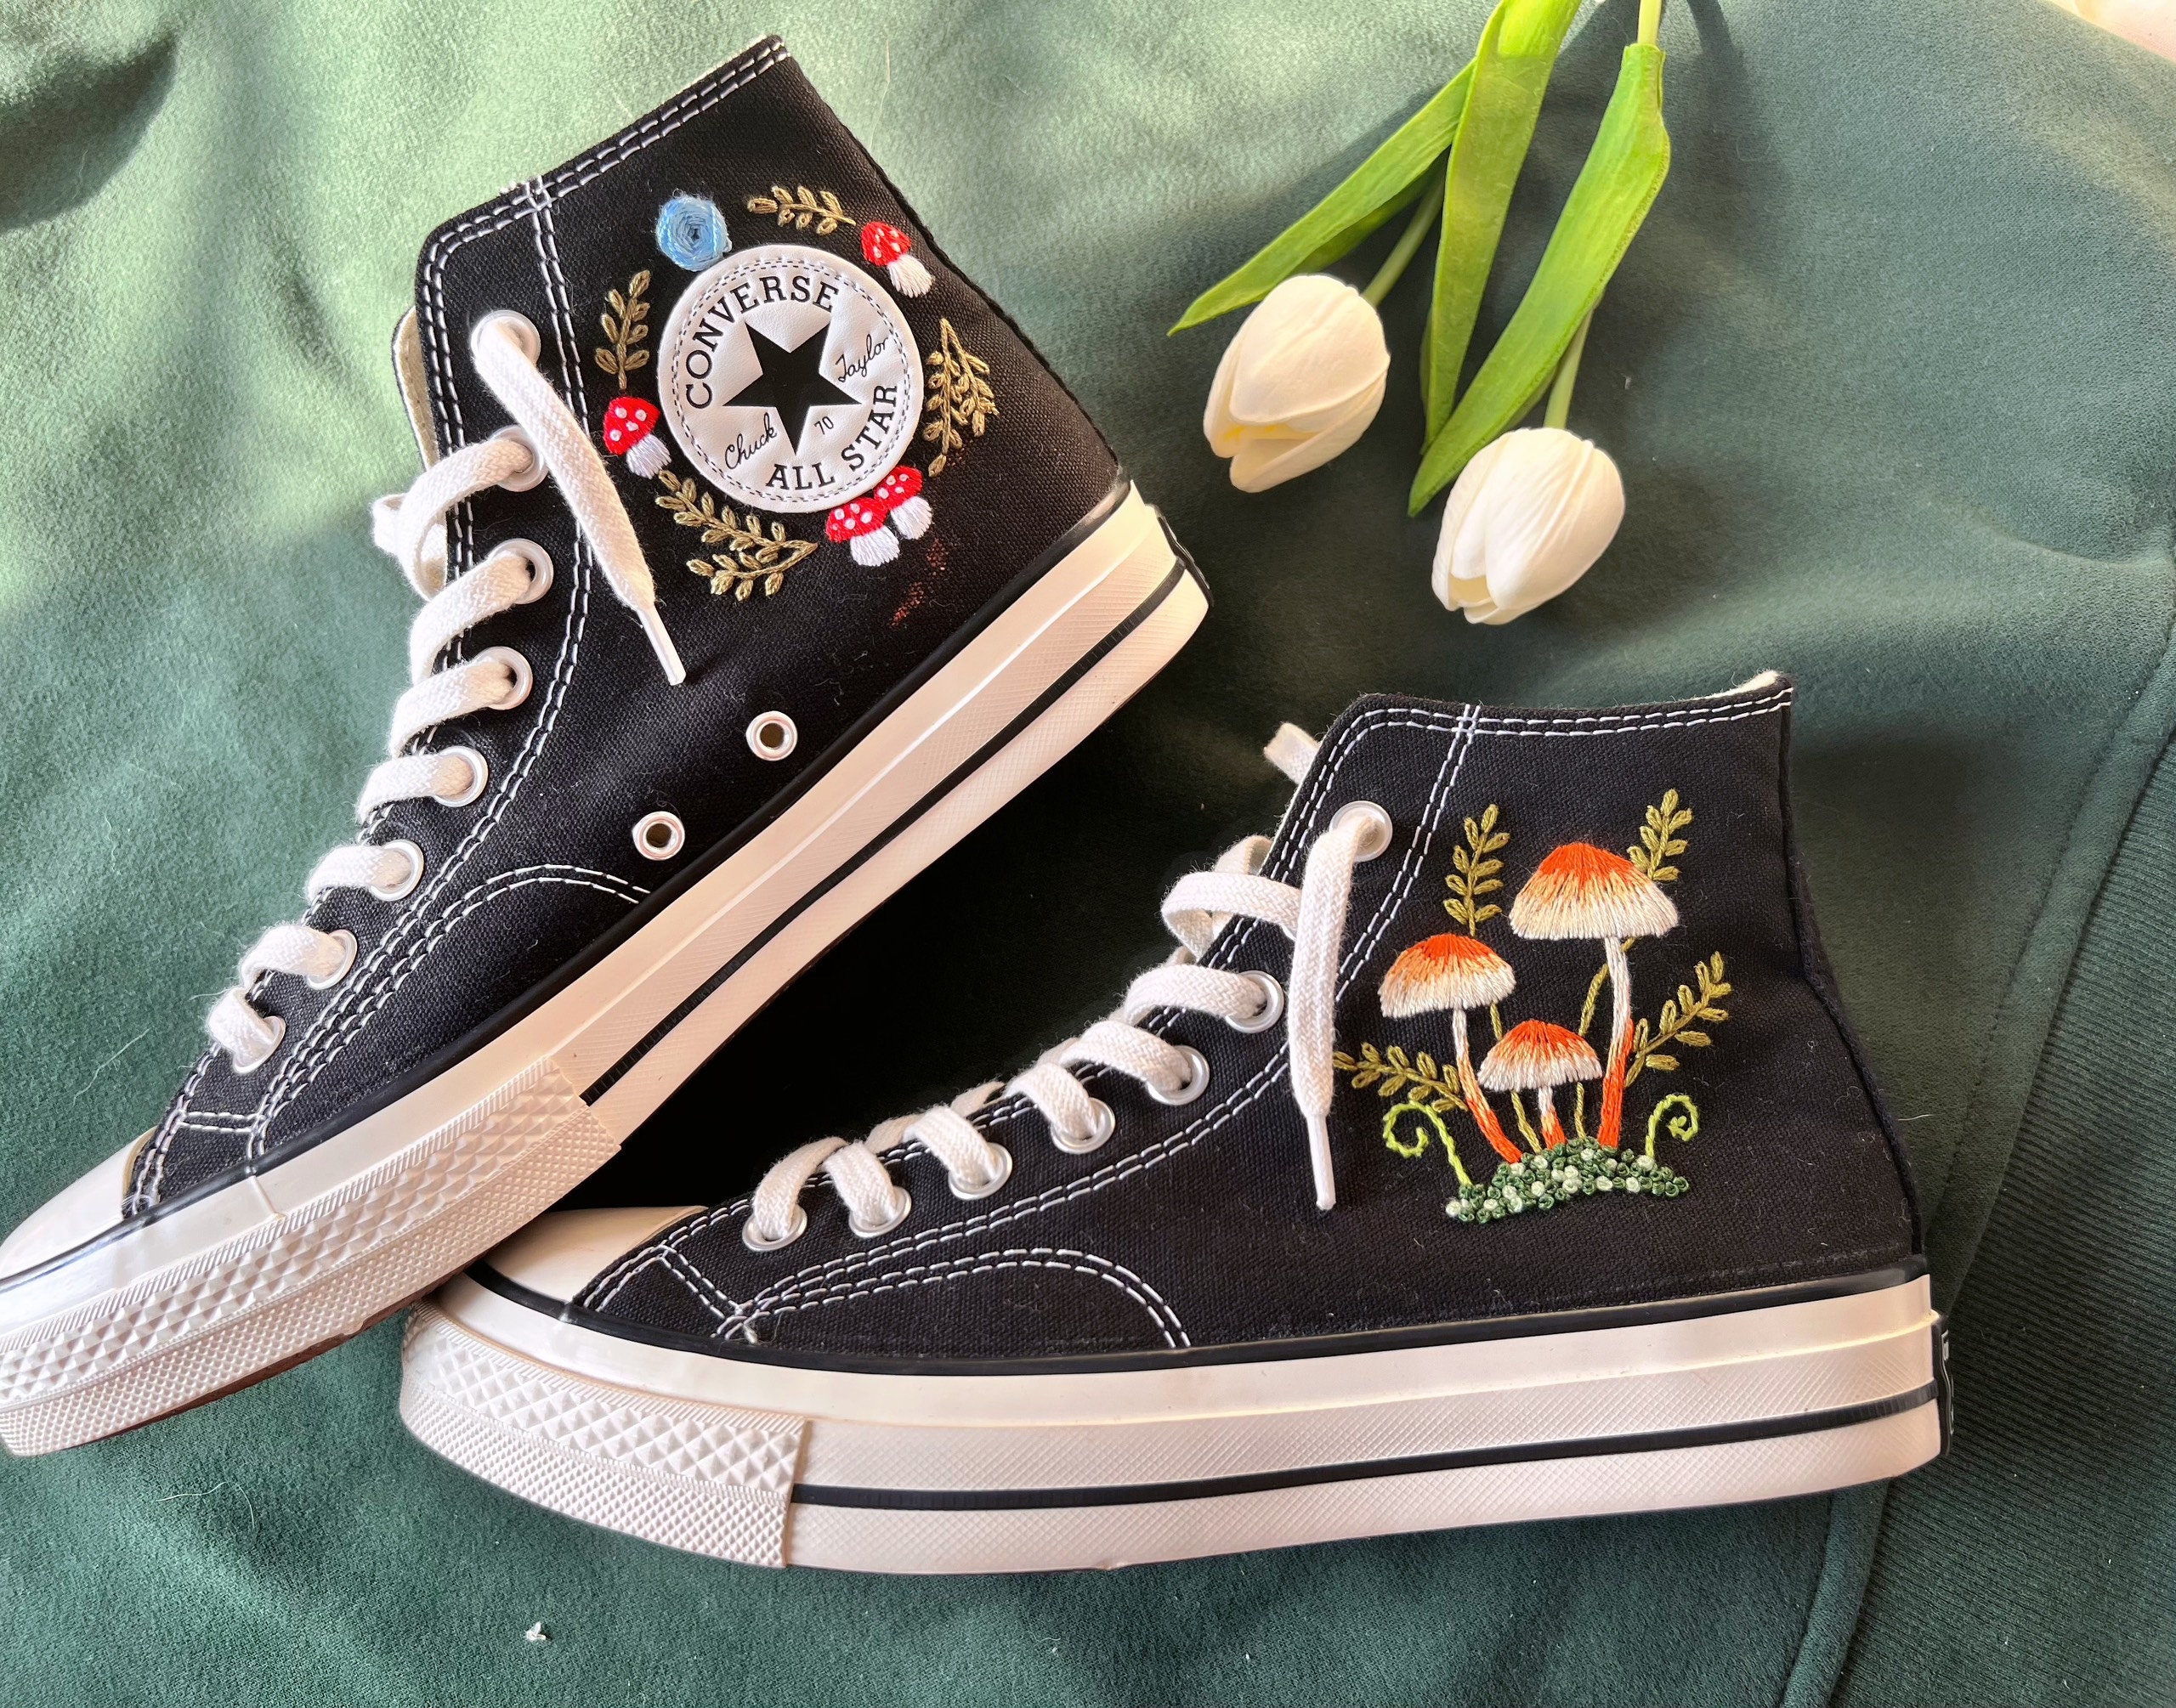 Embroidered Converse/mushroom Converse/converse High Tops - Etsy